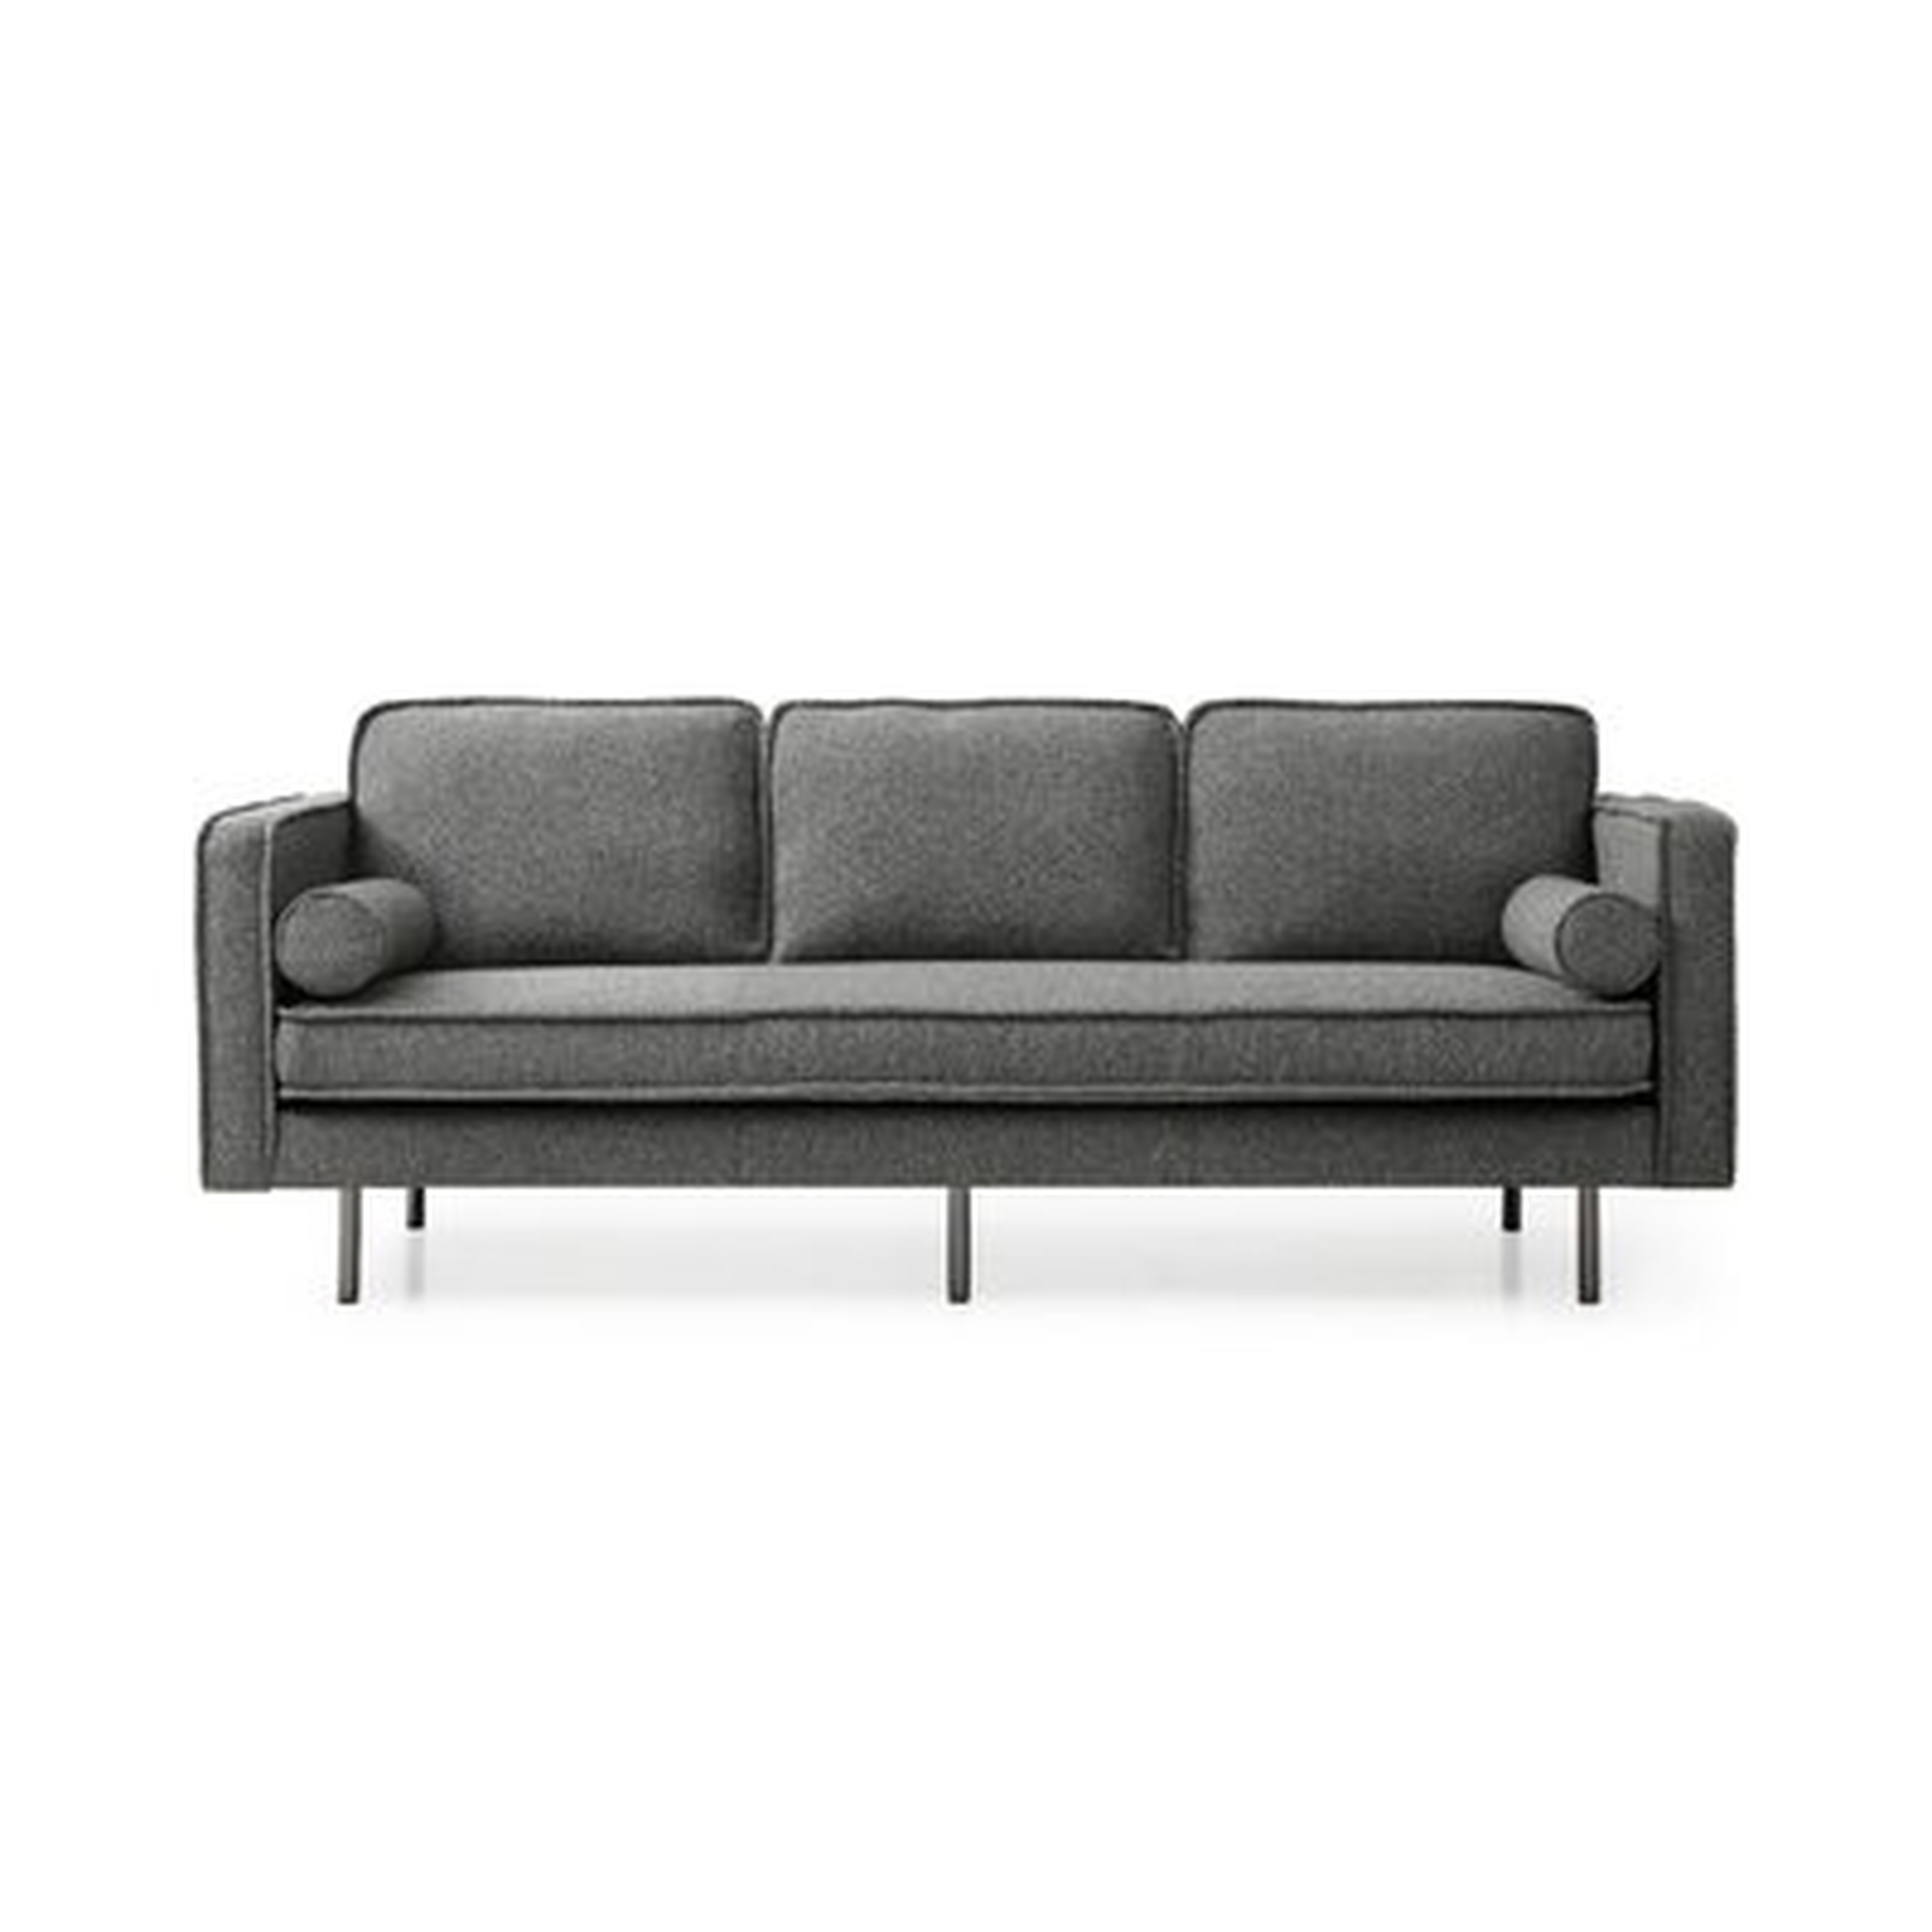 Stampley 89" Wide Square Arm Sofa - Wayfair